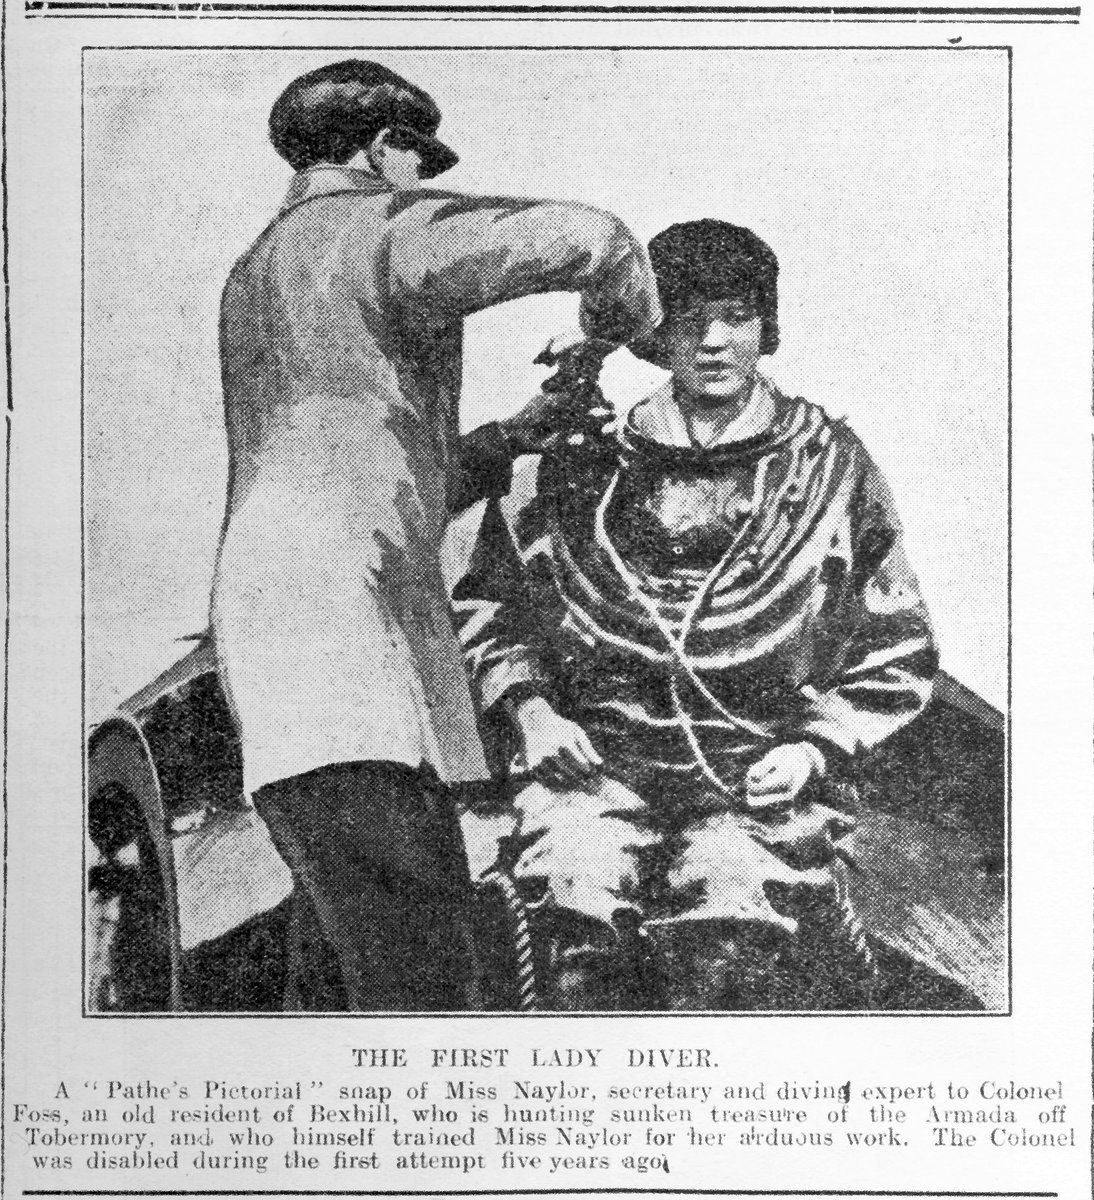 'The First Lady Diver.
A 'Pathe's Pictorial' snap of Miss Naylor, secretary and diving expert to Colonel Foss, an old resident of Bexhill, who is hunting sunken treasure of the Armada off Tobermory and who himself trained Miss Naylor...' Bexhill Chronicle 7.7.1924 #WyrdWednesday